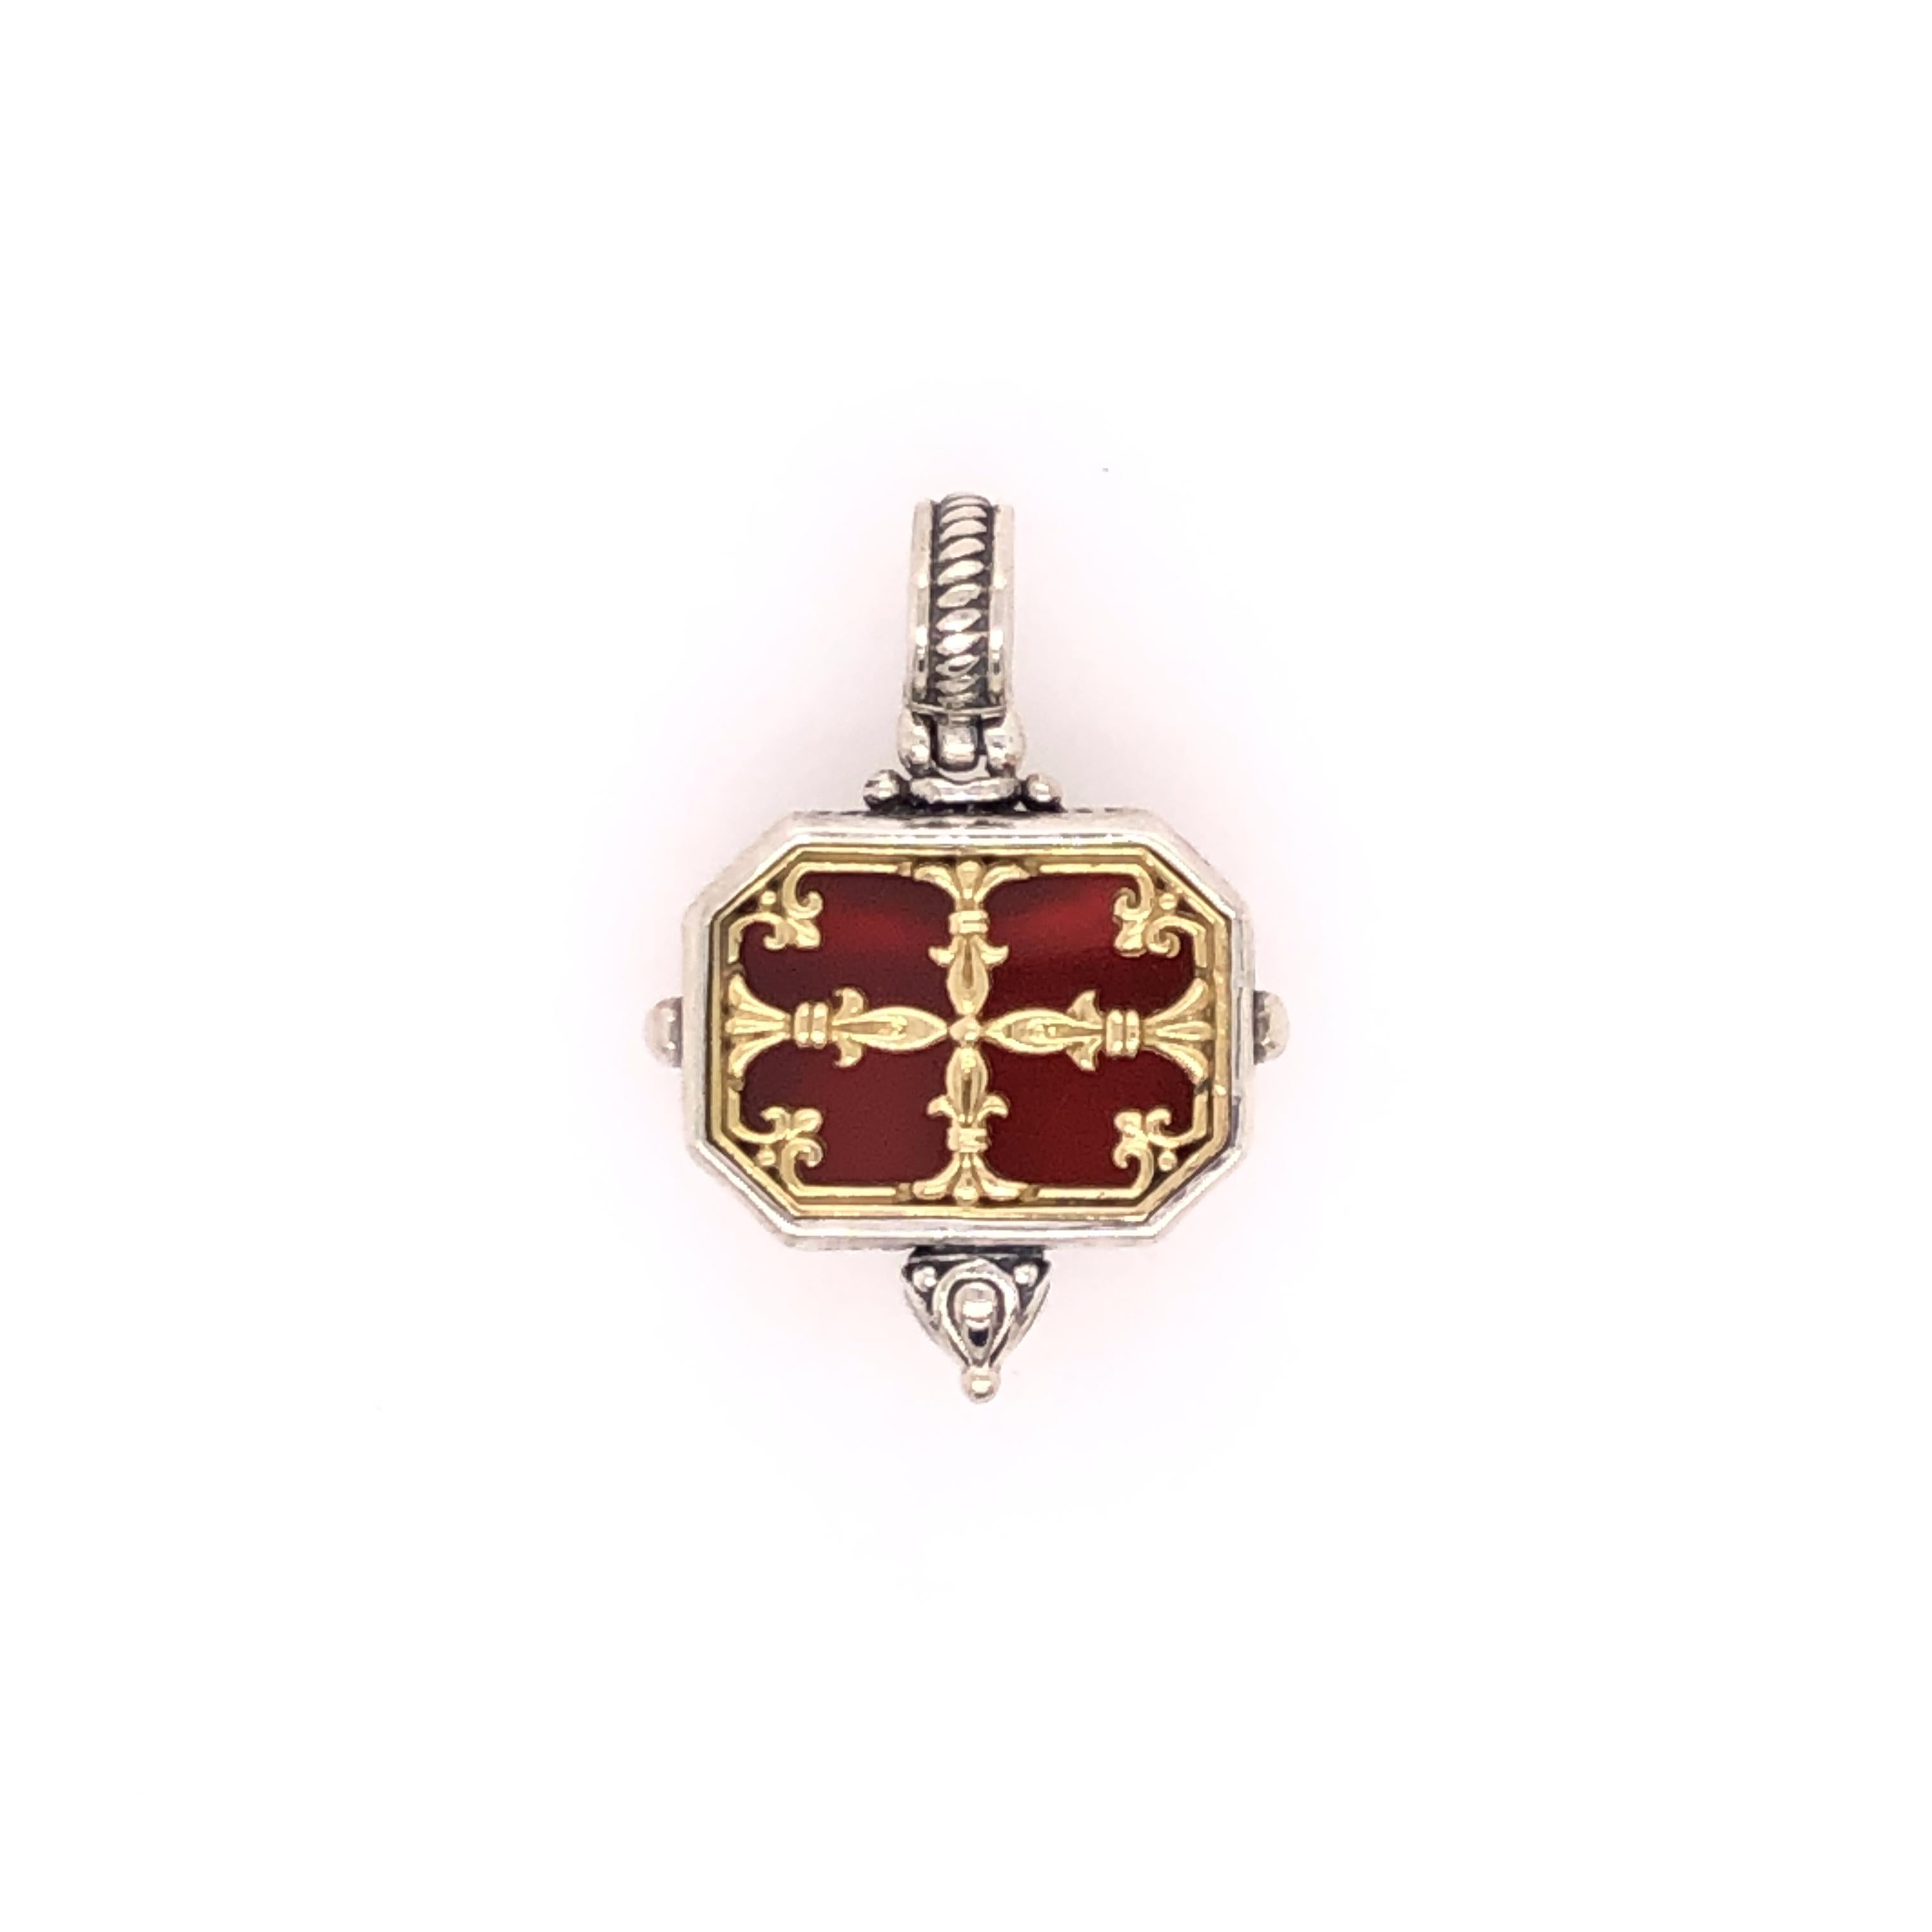 Gemstone: Carnelian
Material: Sterling Silver & 18k Gold
Size: One Size

Stamped: 750, 925, KONSTANTINO